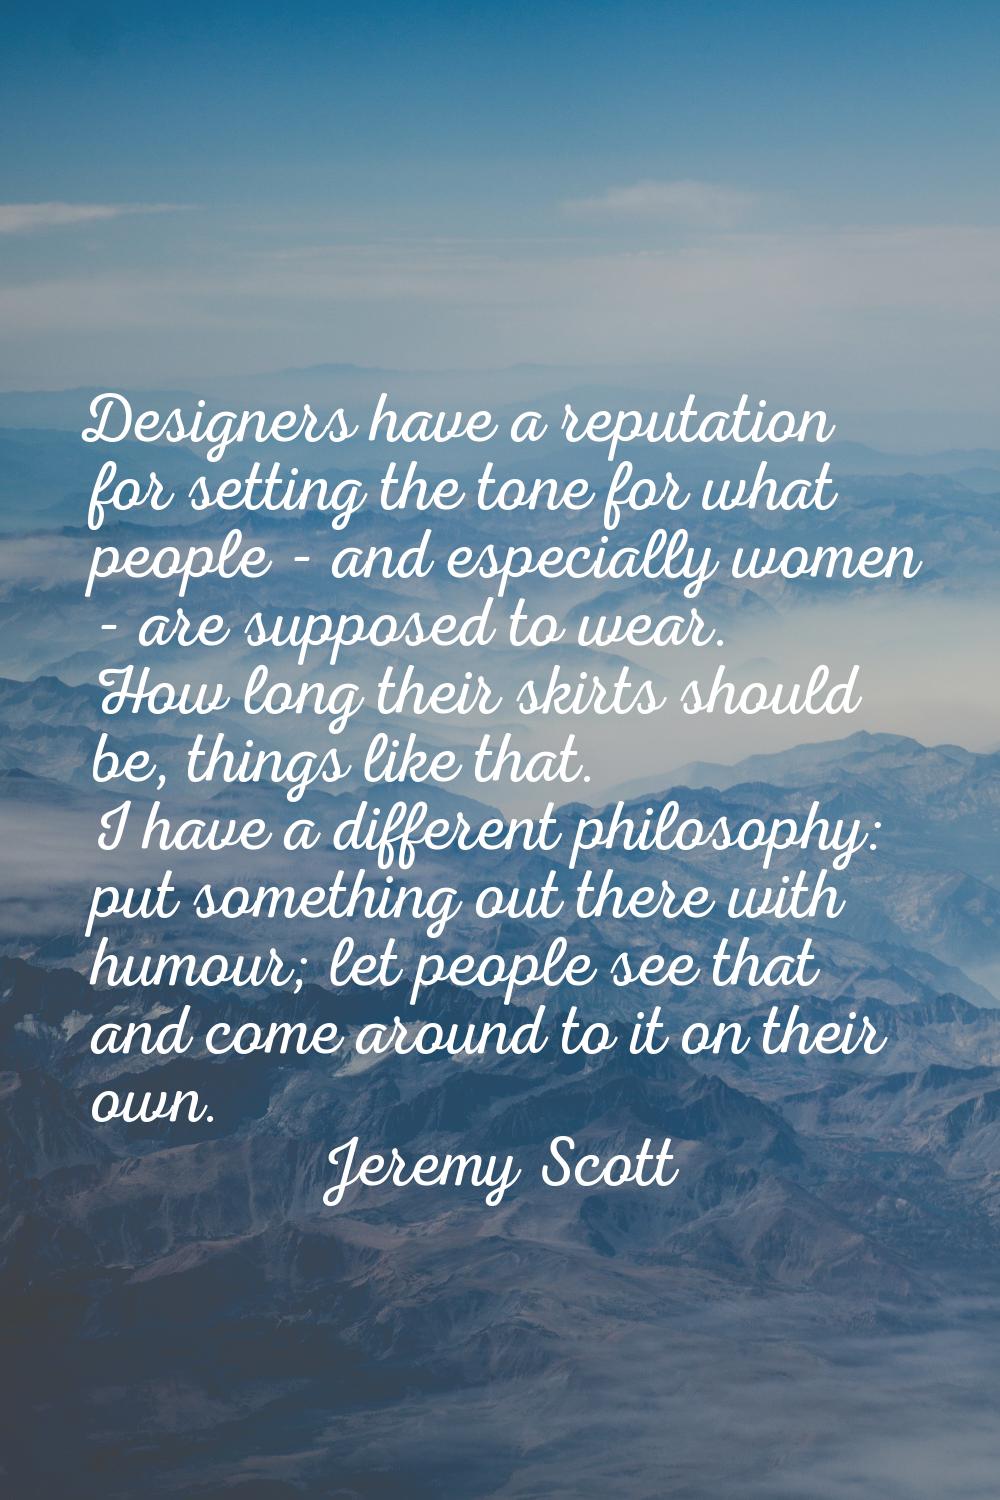 Designers have a reputation for setting the tone for what people - and especially women - are suppo